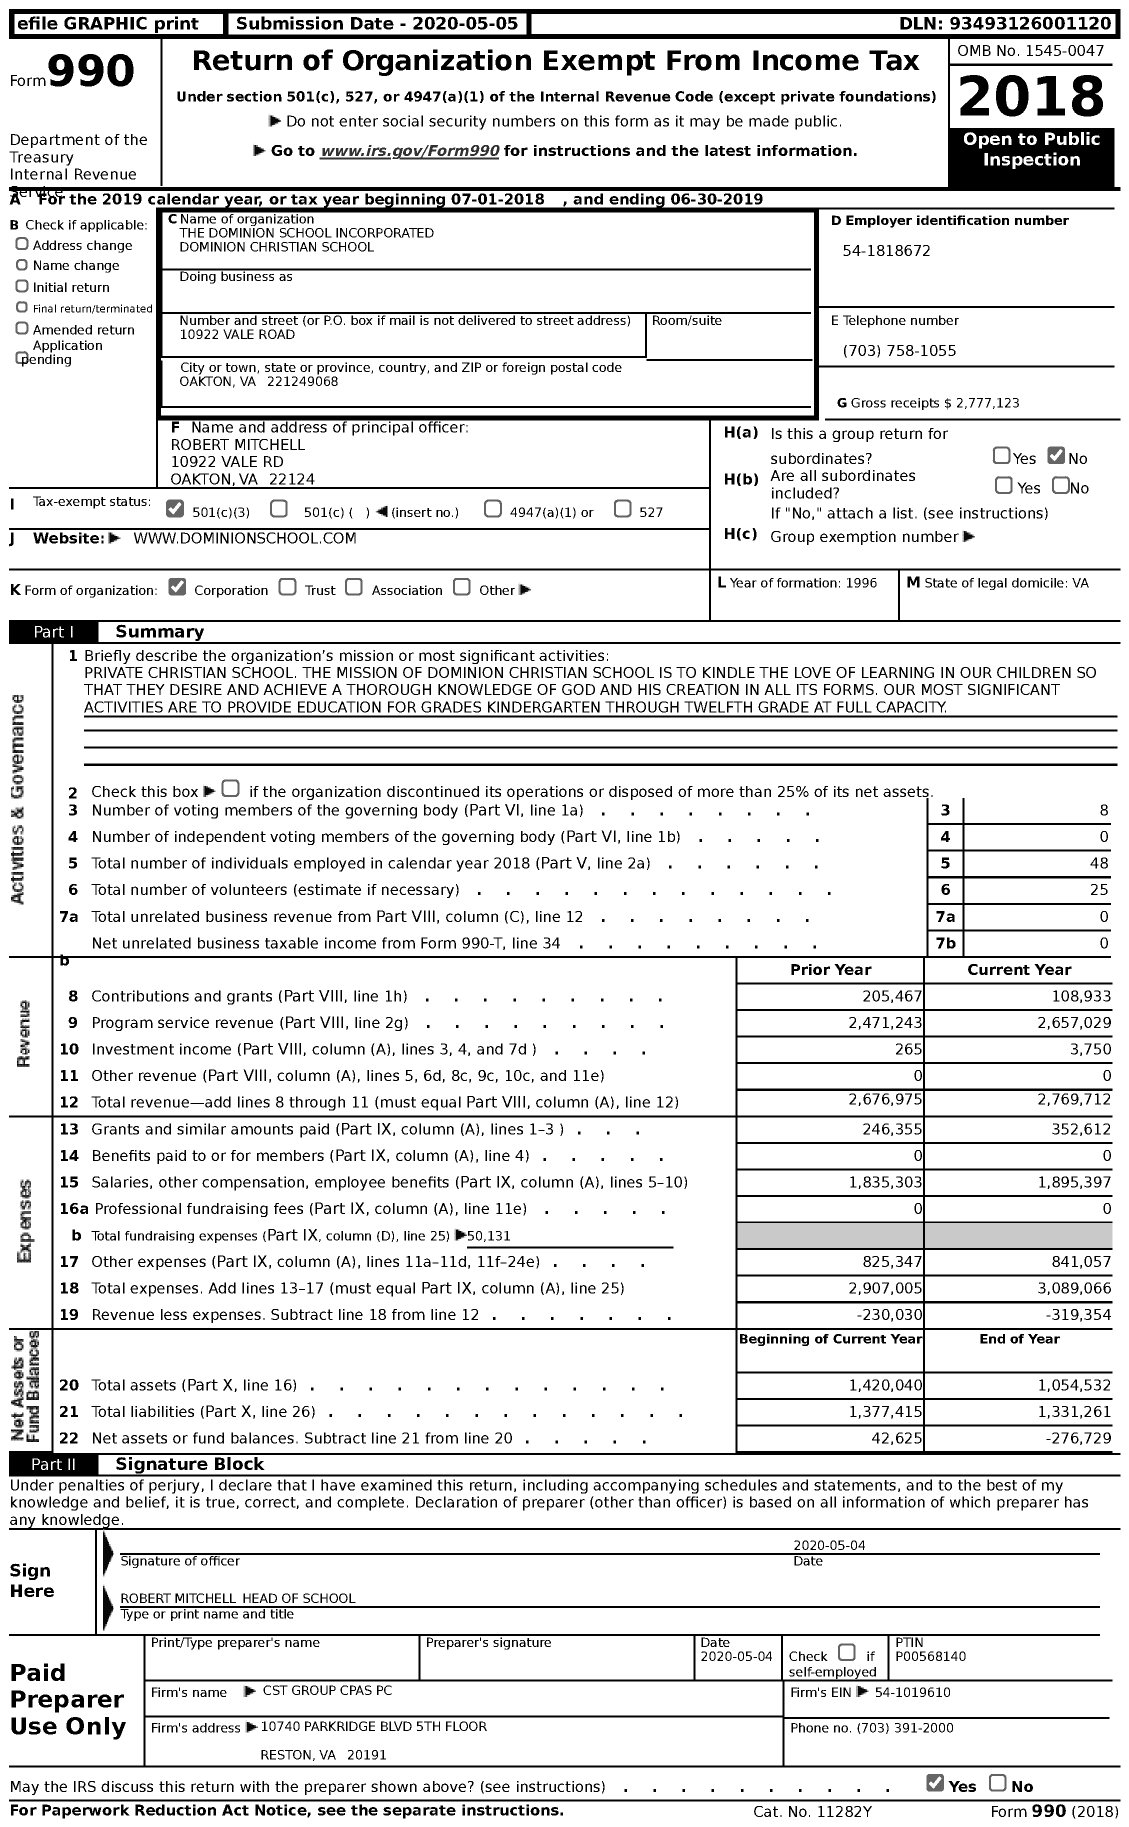 Image of first page of 2018 Form 990 for The Dominion School Incorporated Dominion Christian School